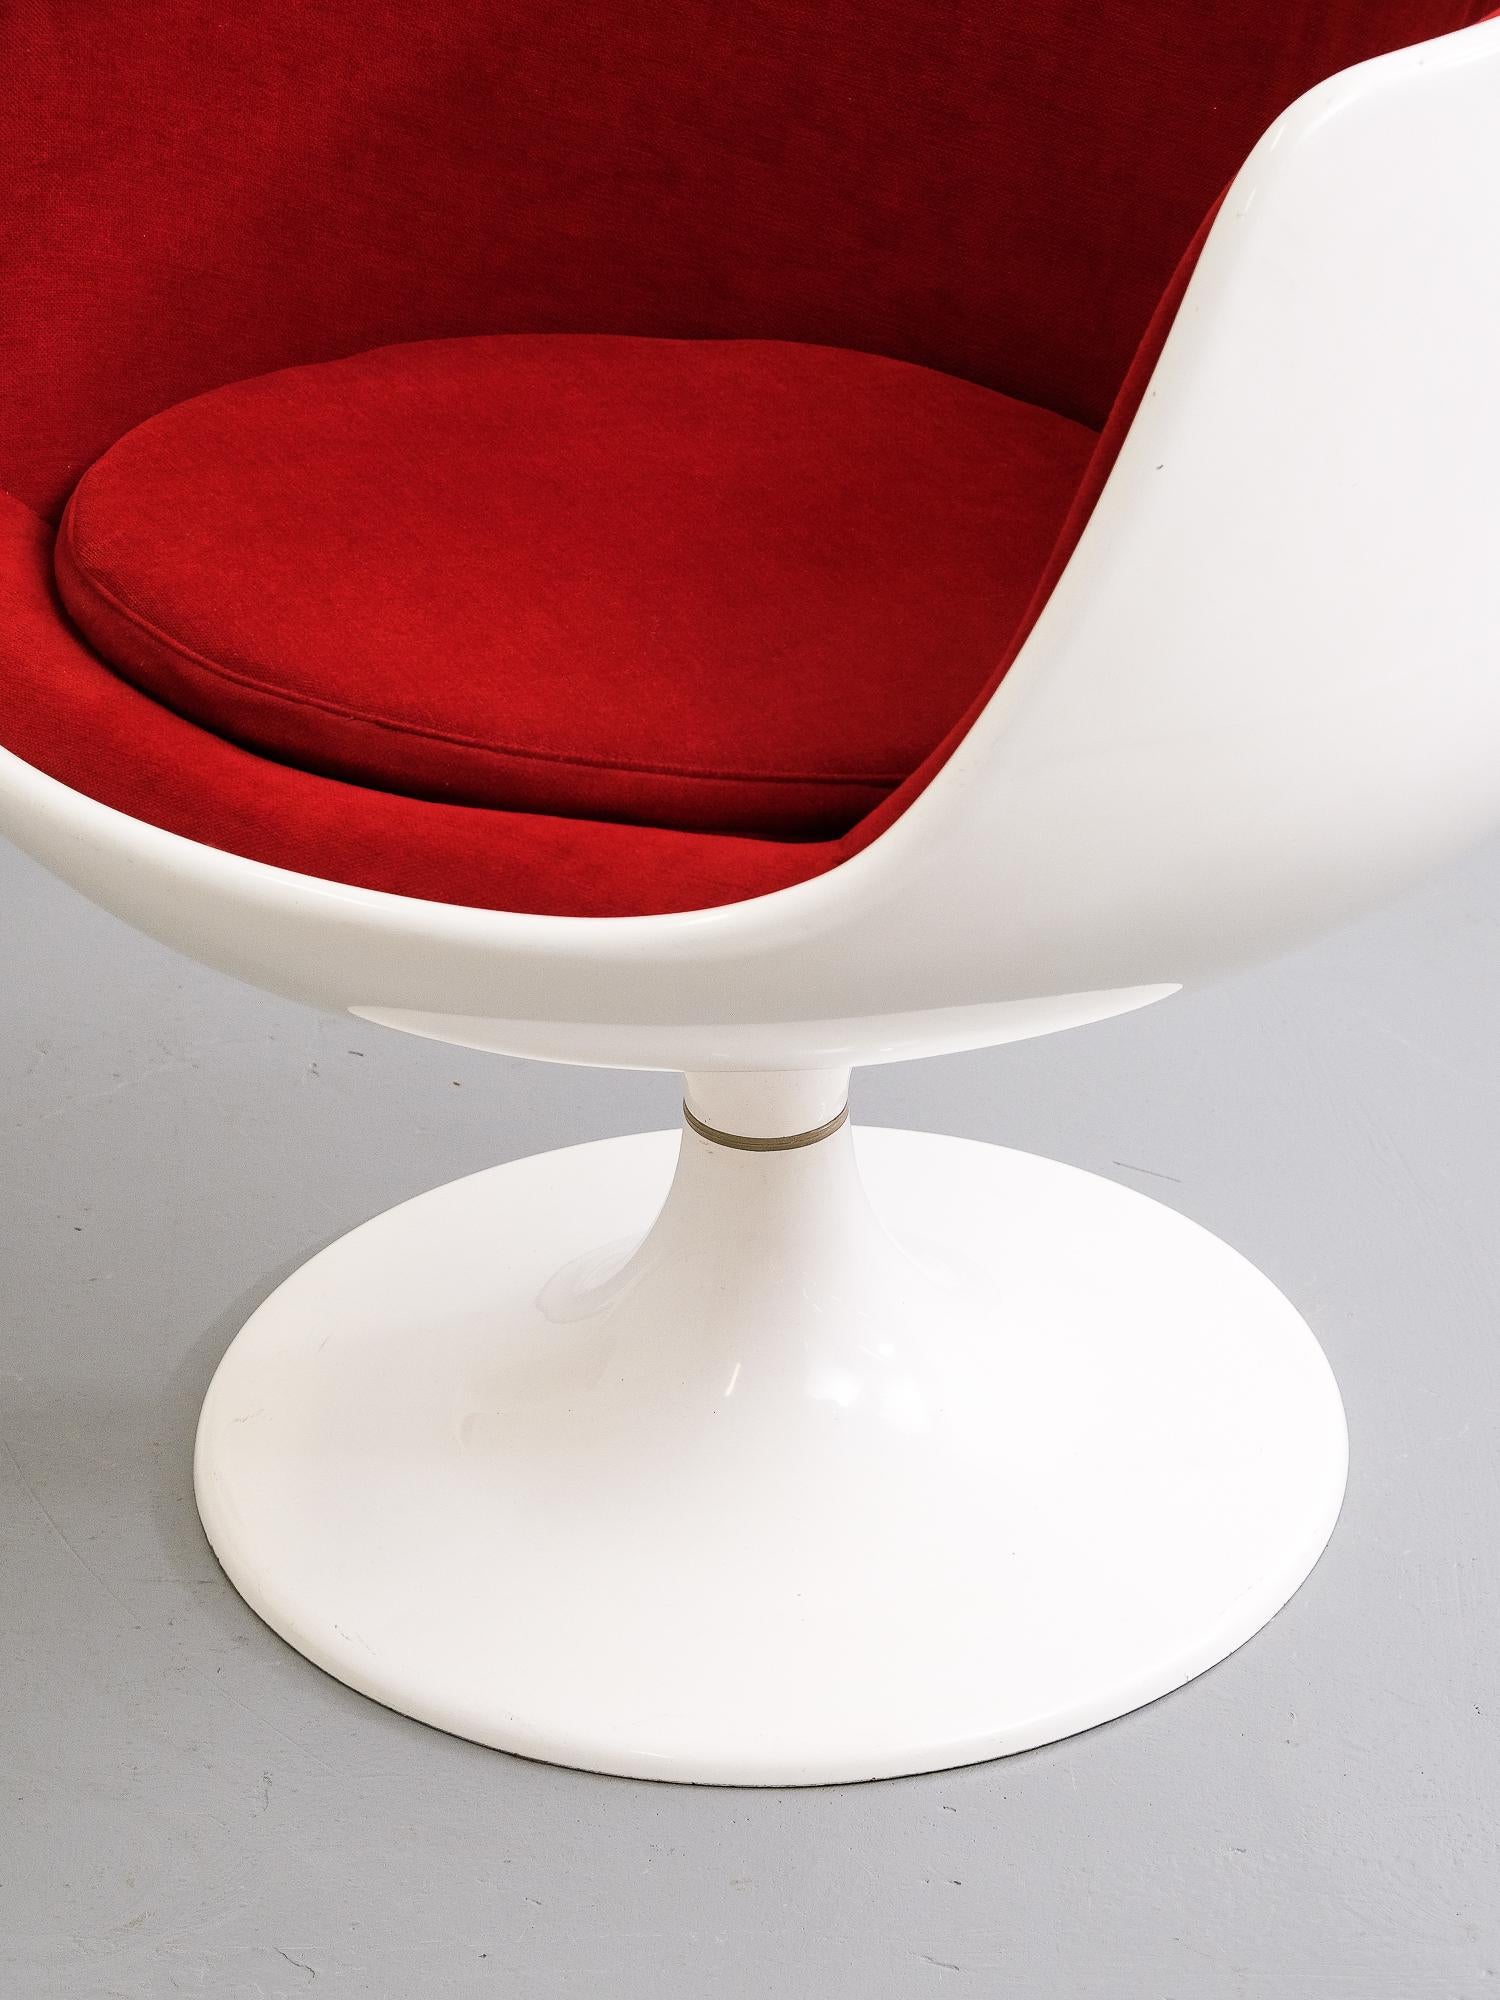 An eye-catching set of two original Cognac V.S.O.P chairs designed by Eero Aarnio, manufactured by Asko in Finland in late 1960s.

These highly recognizable chairs are very fitting examples of Mid-Century Modern design. They are made of white